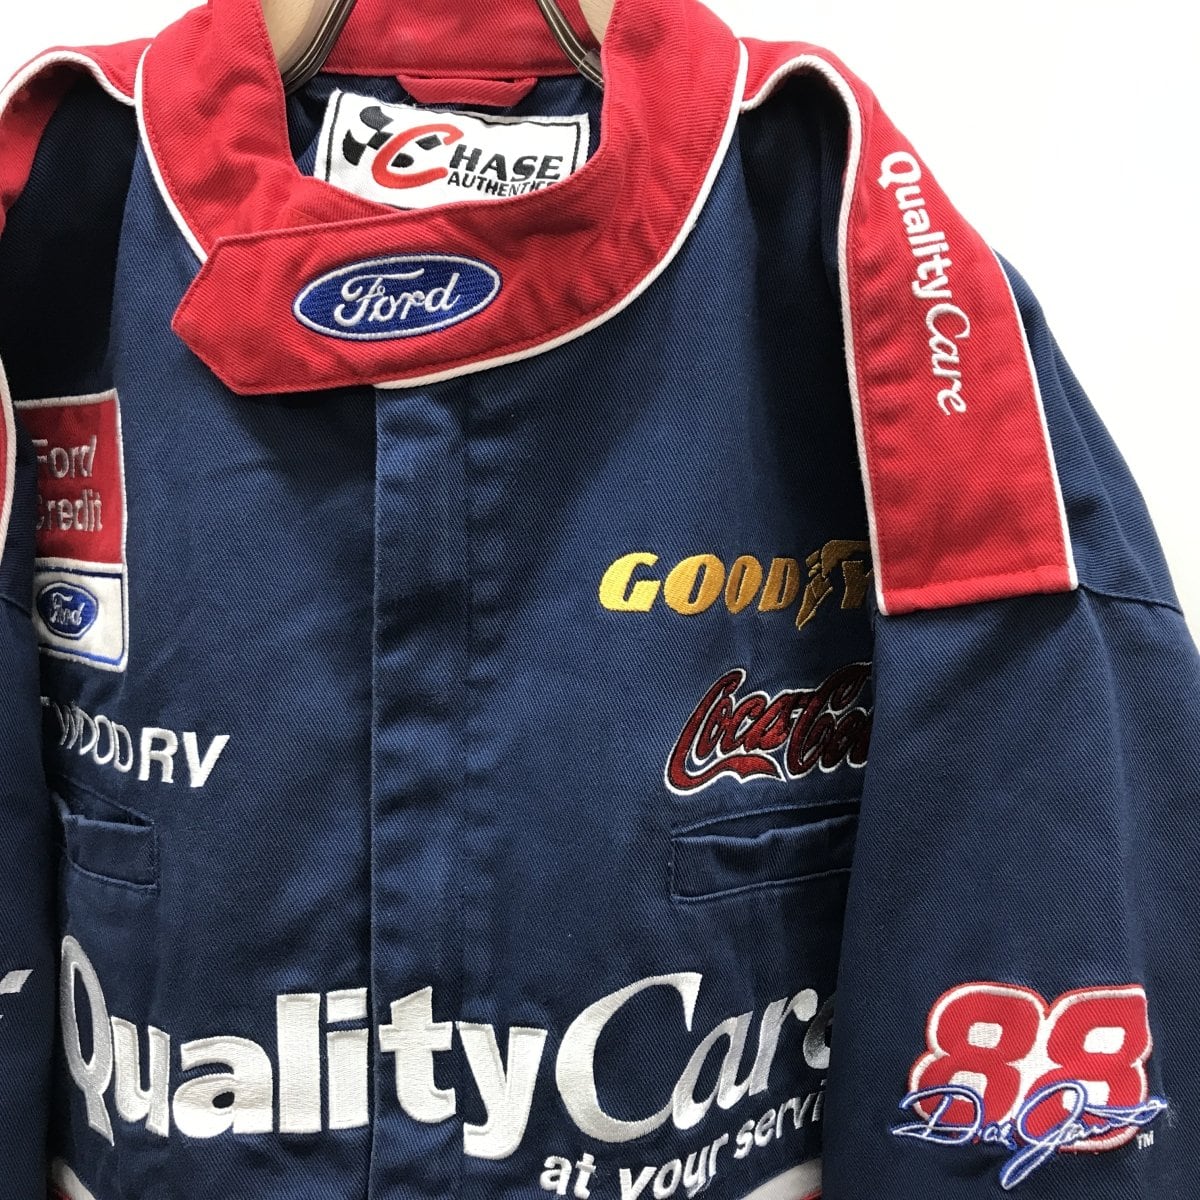 CHASE AUTHENTICS FORD QUALITY CARE NASCAR 90年代 レーシング 